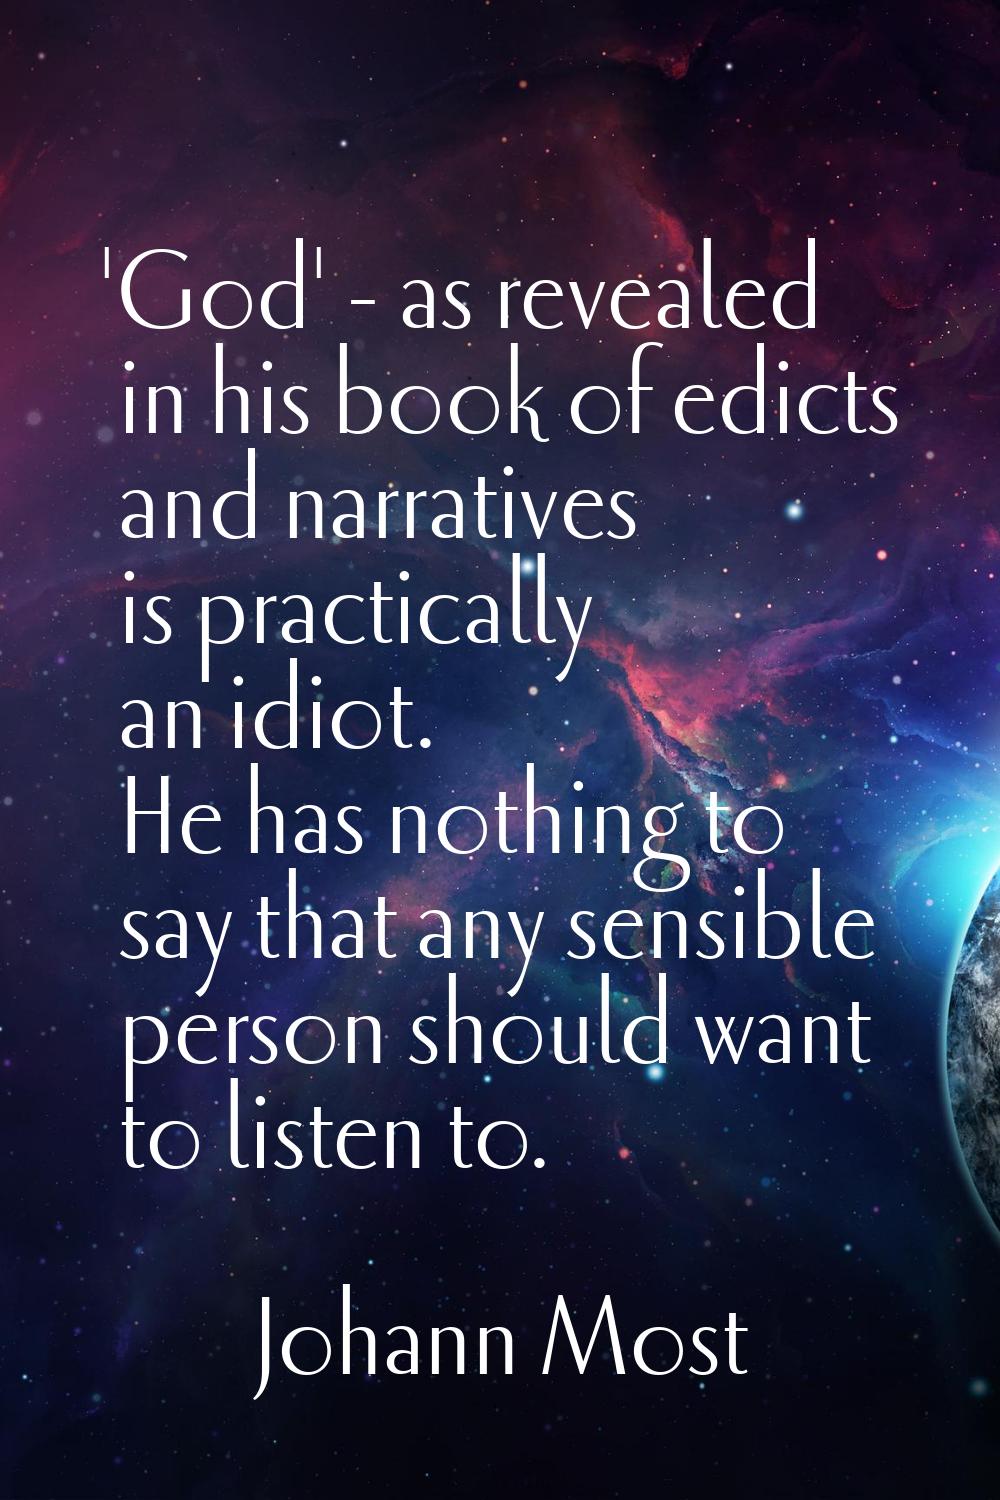 'God' - as revealed in his book of edicts and narratives is practically an idiot. He has nothing to